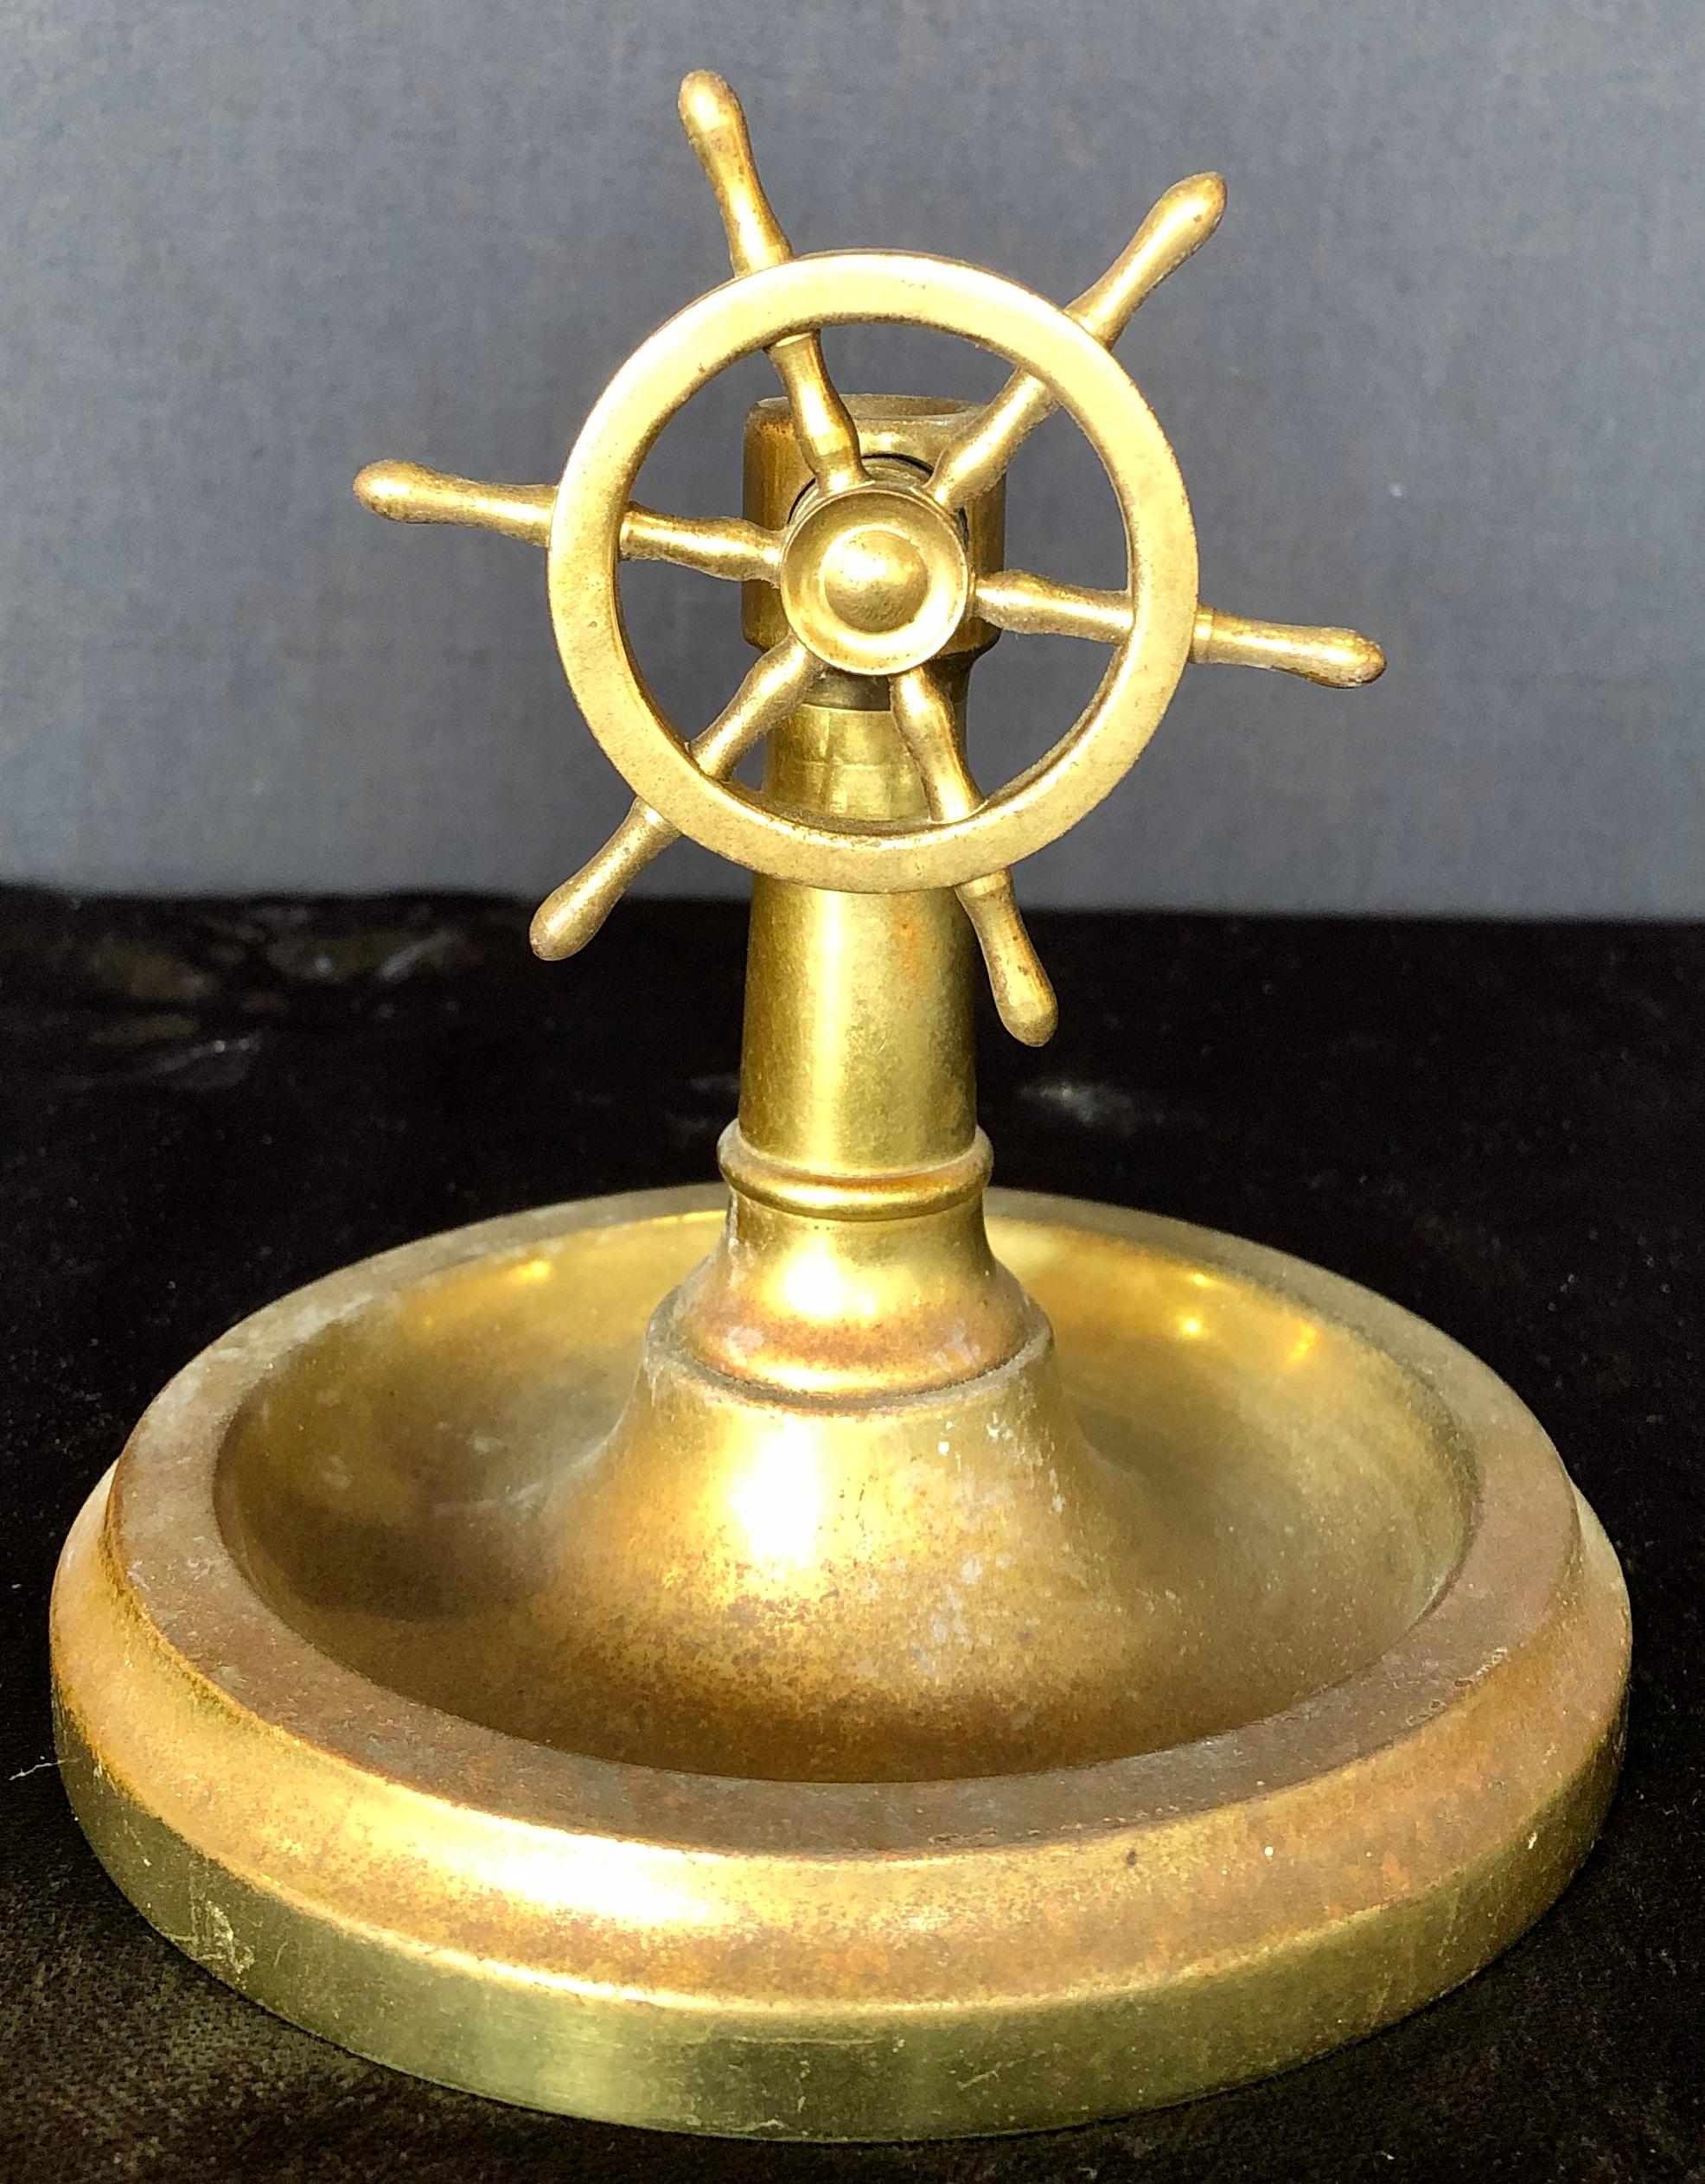 Brass wheel cigar cutter. Three available at the time of this listing. Part of an enormous collection of cigar cutter and memorabilia.
A memento from a voyage and sea, the vintage brass nautical cutter is in the form of ship's wheel, spinning the